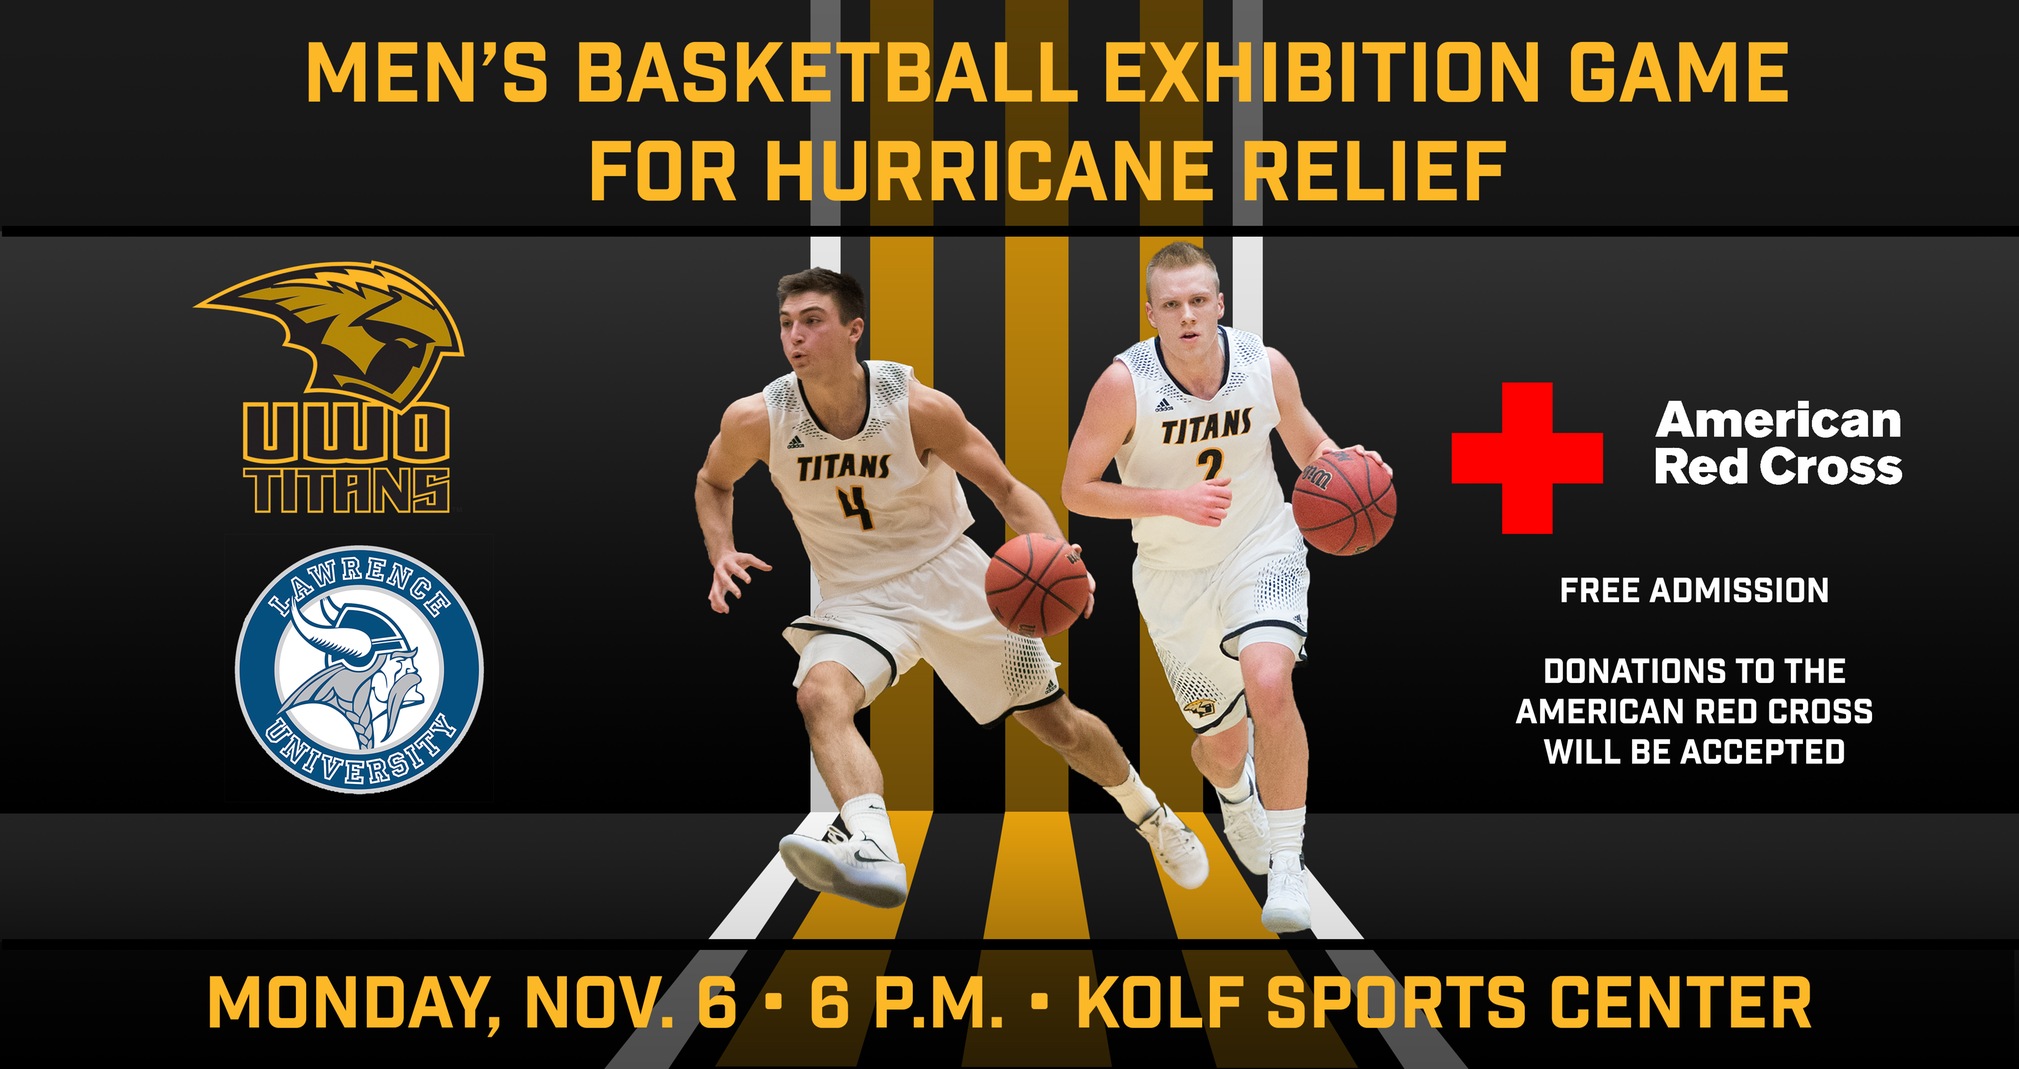 Titans, Vikings To Play Exhibition Basketball Game For Hurricane Relief